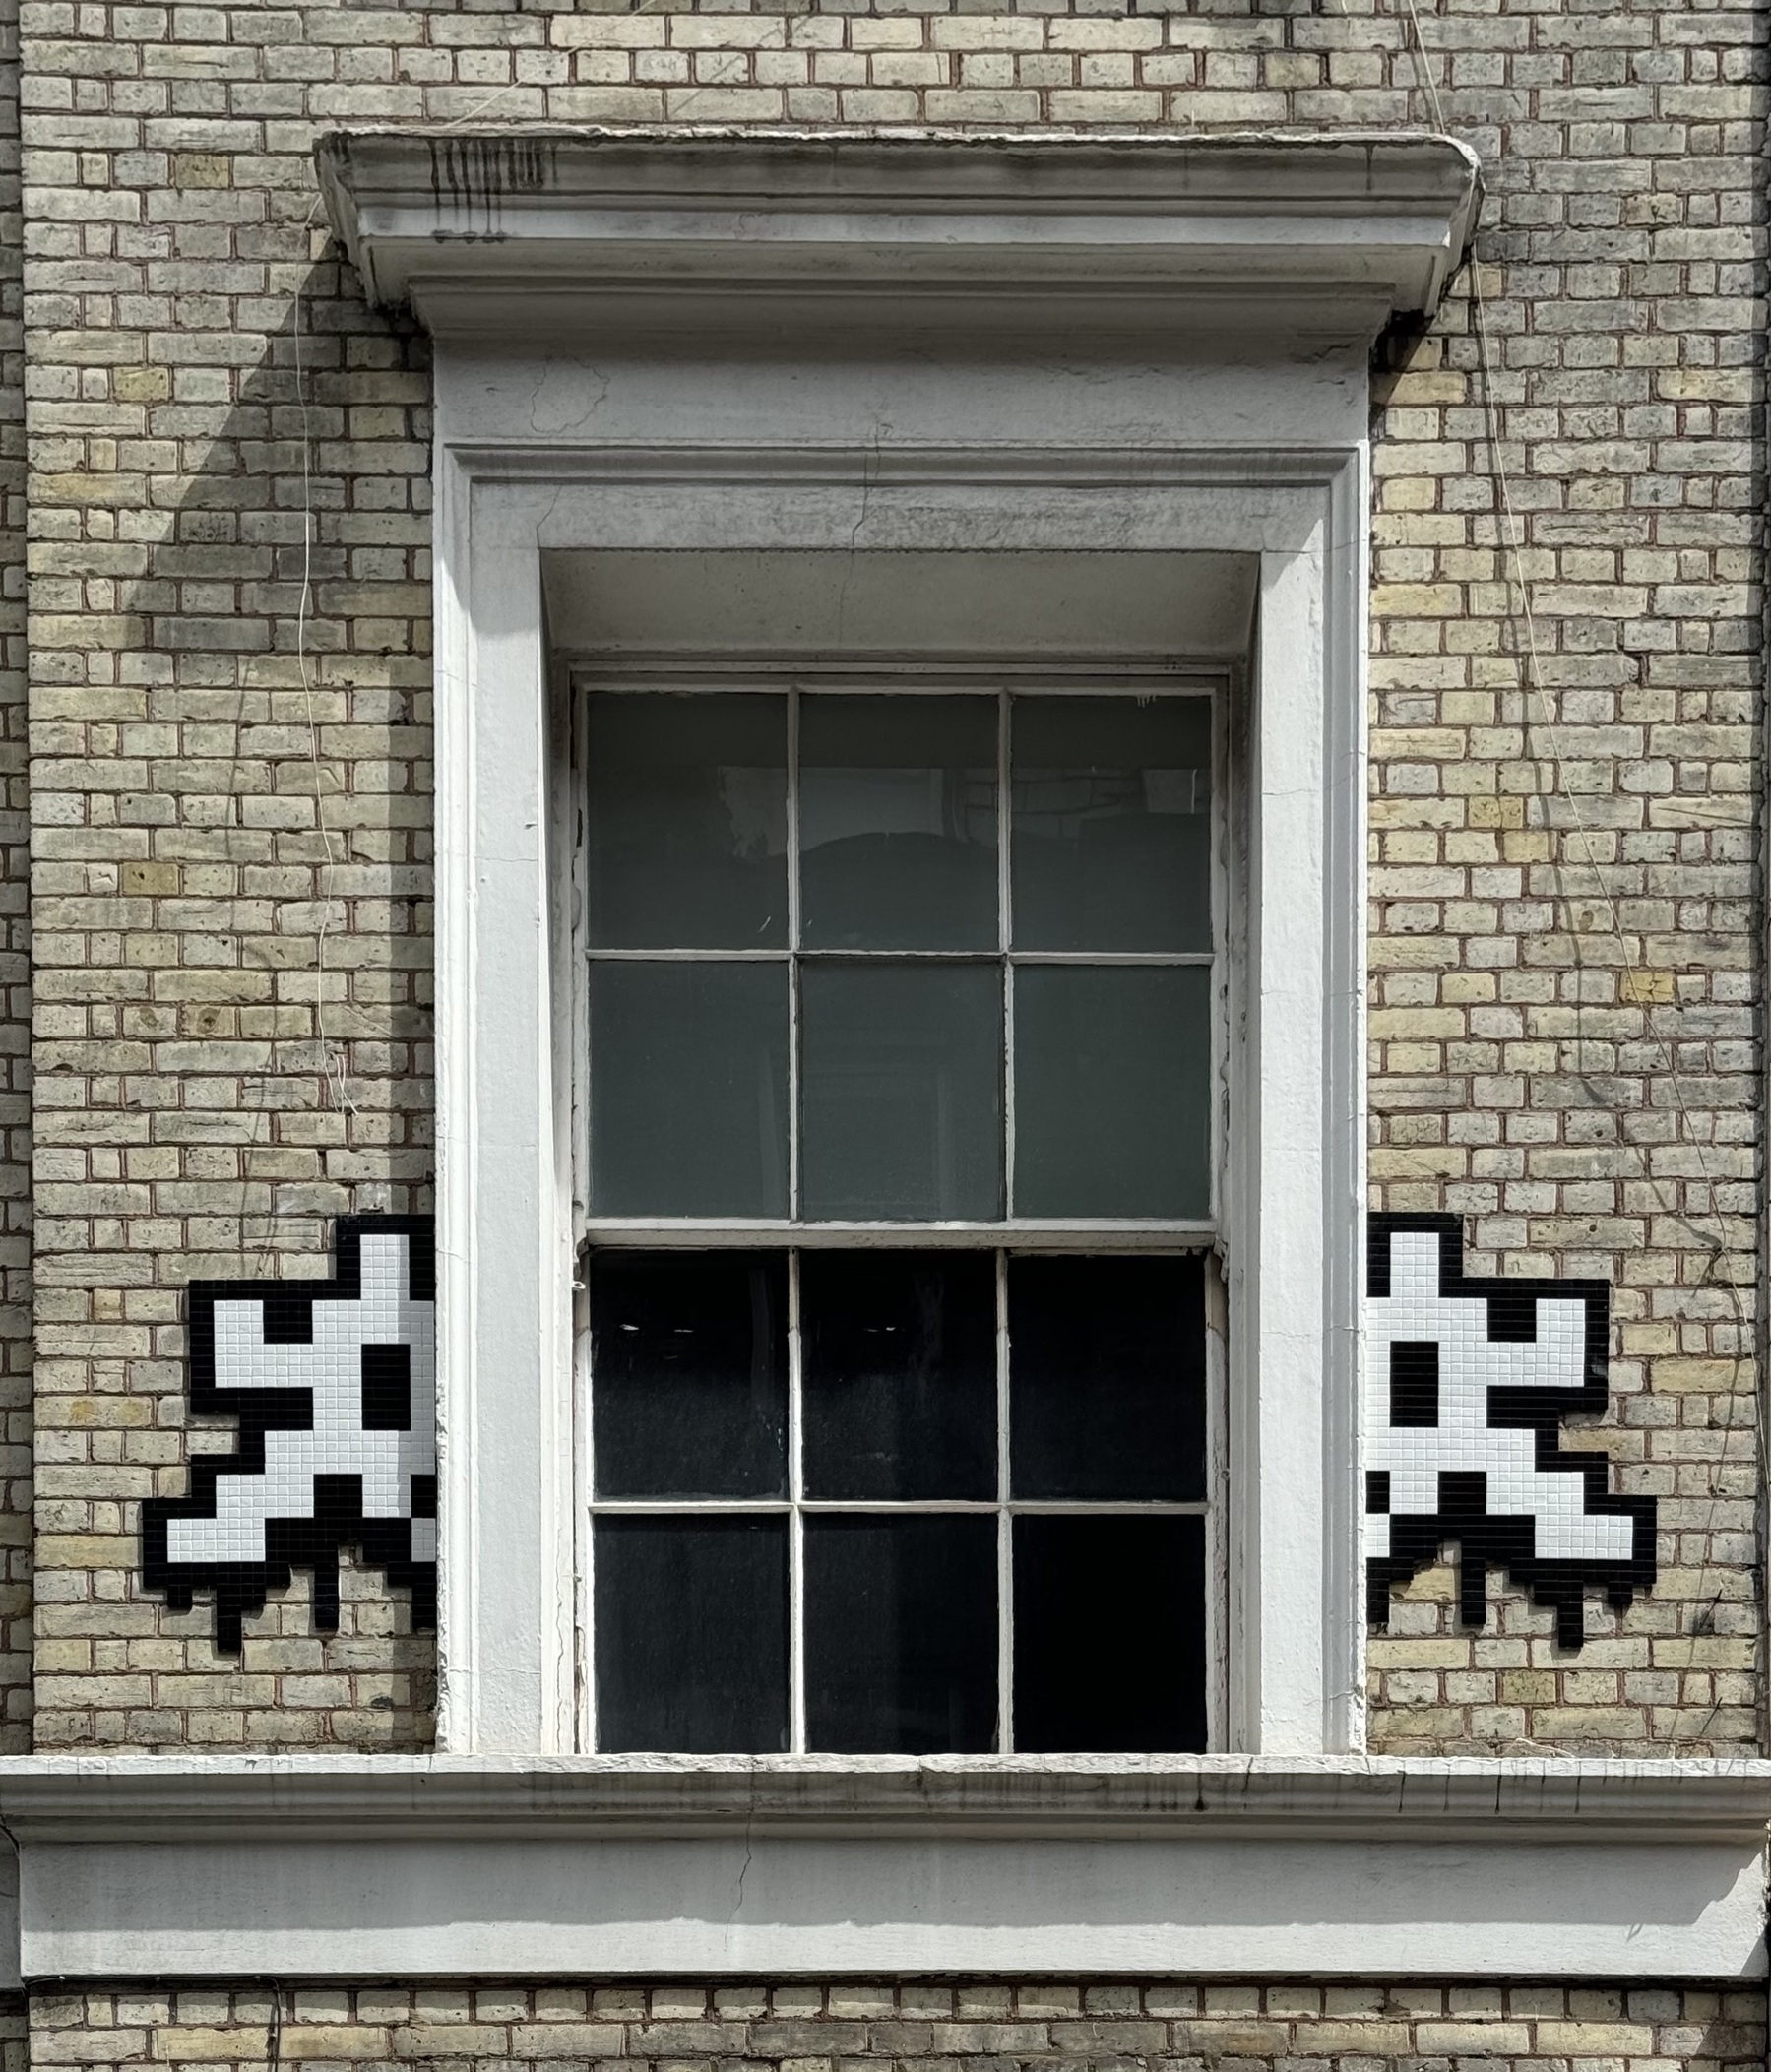 A pixelated space invader, split in half by a window.